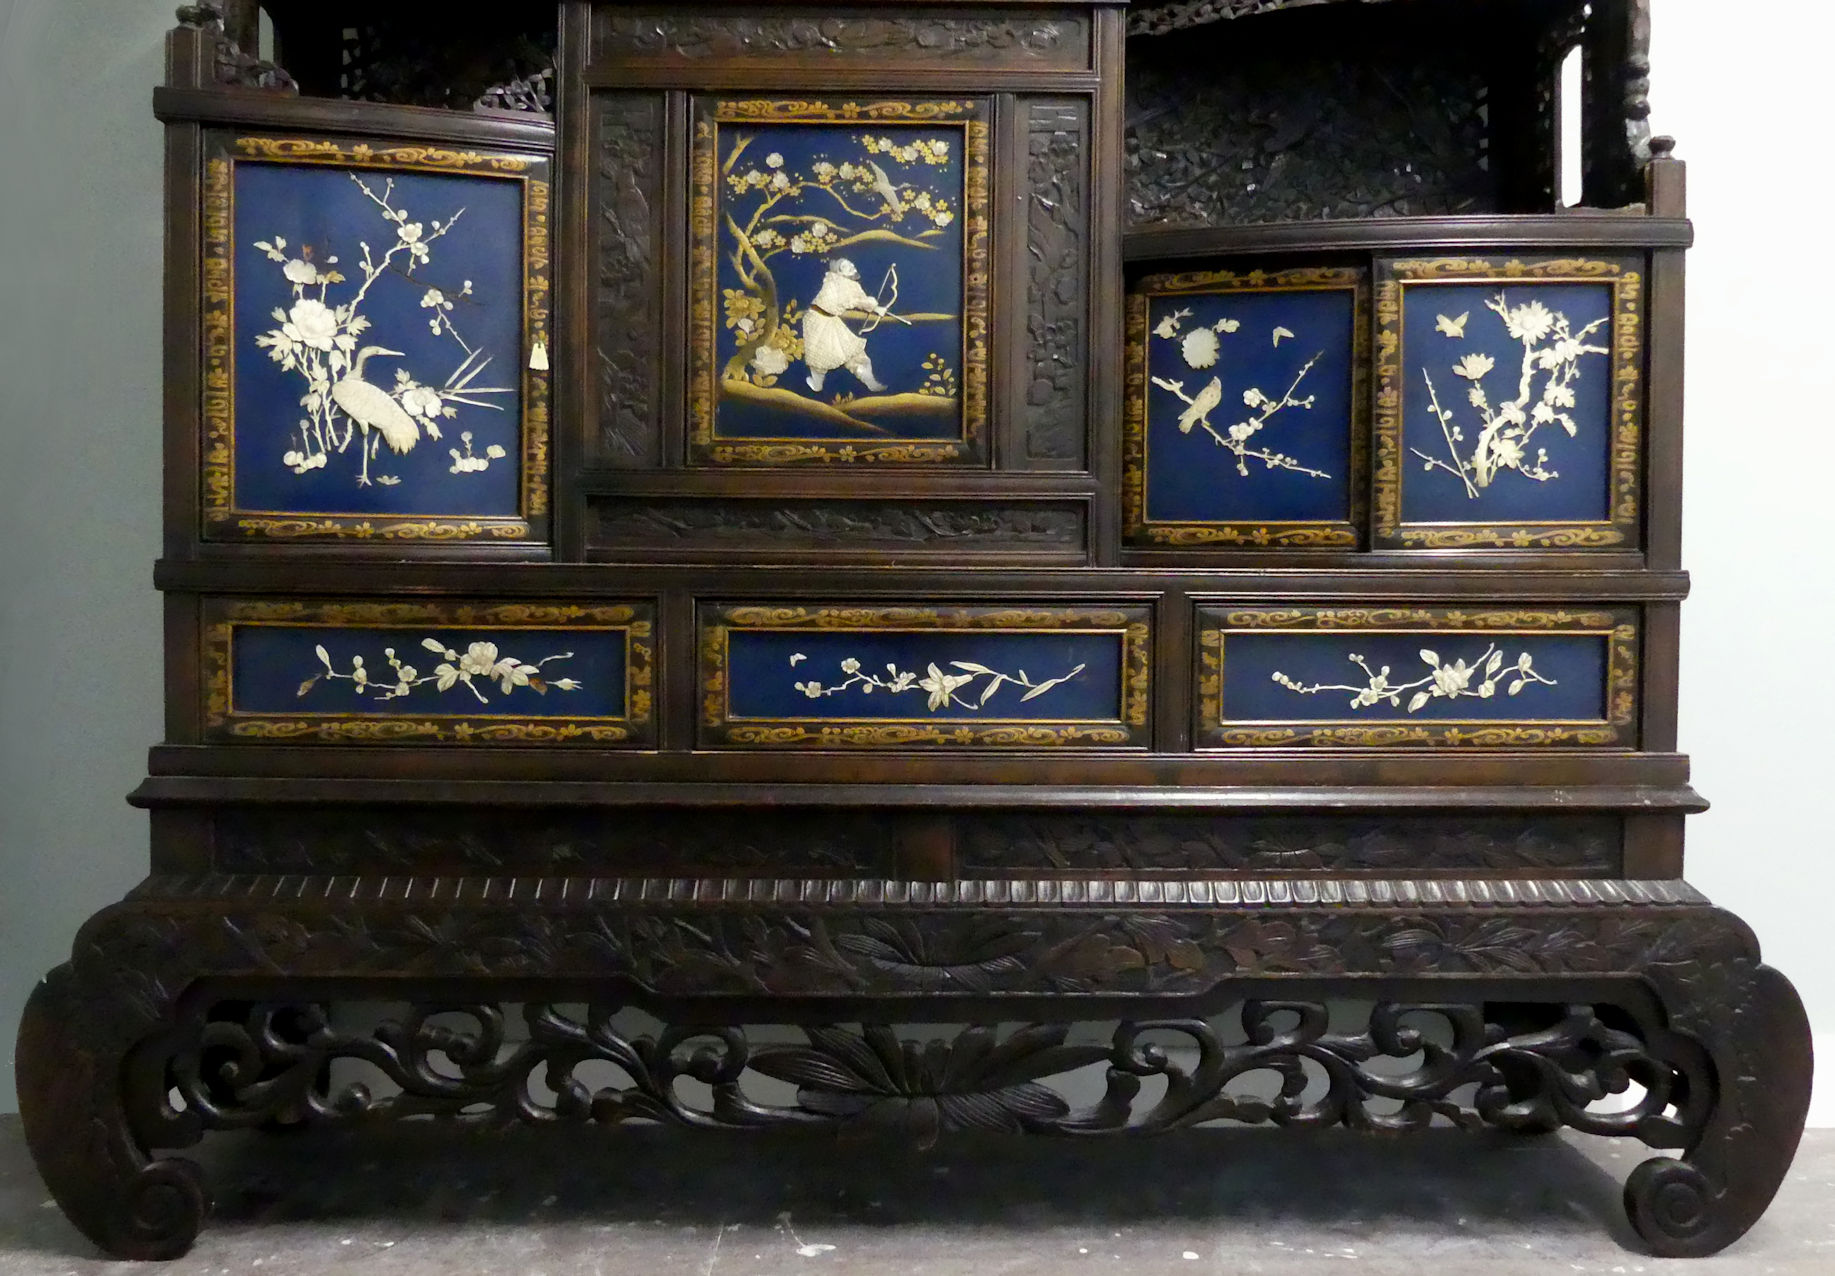 Late 19th century Japanese Meiji period Shibayama display cabinet, the blue lacquered panels - Image 7 of 21